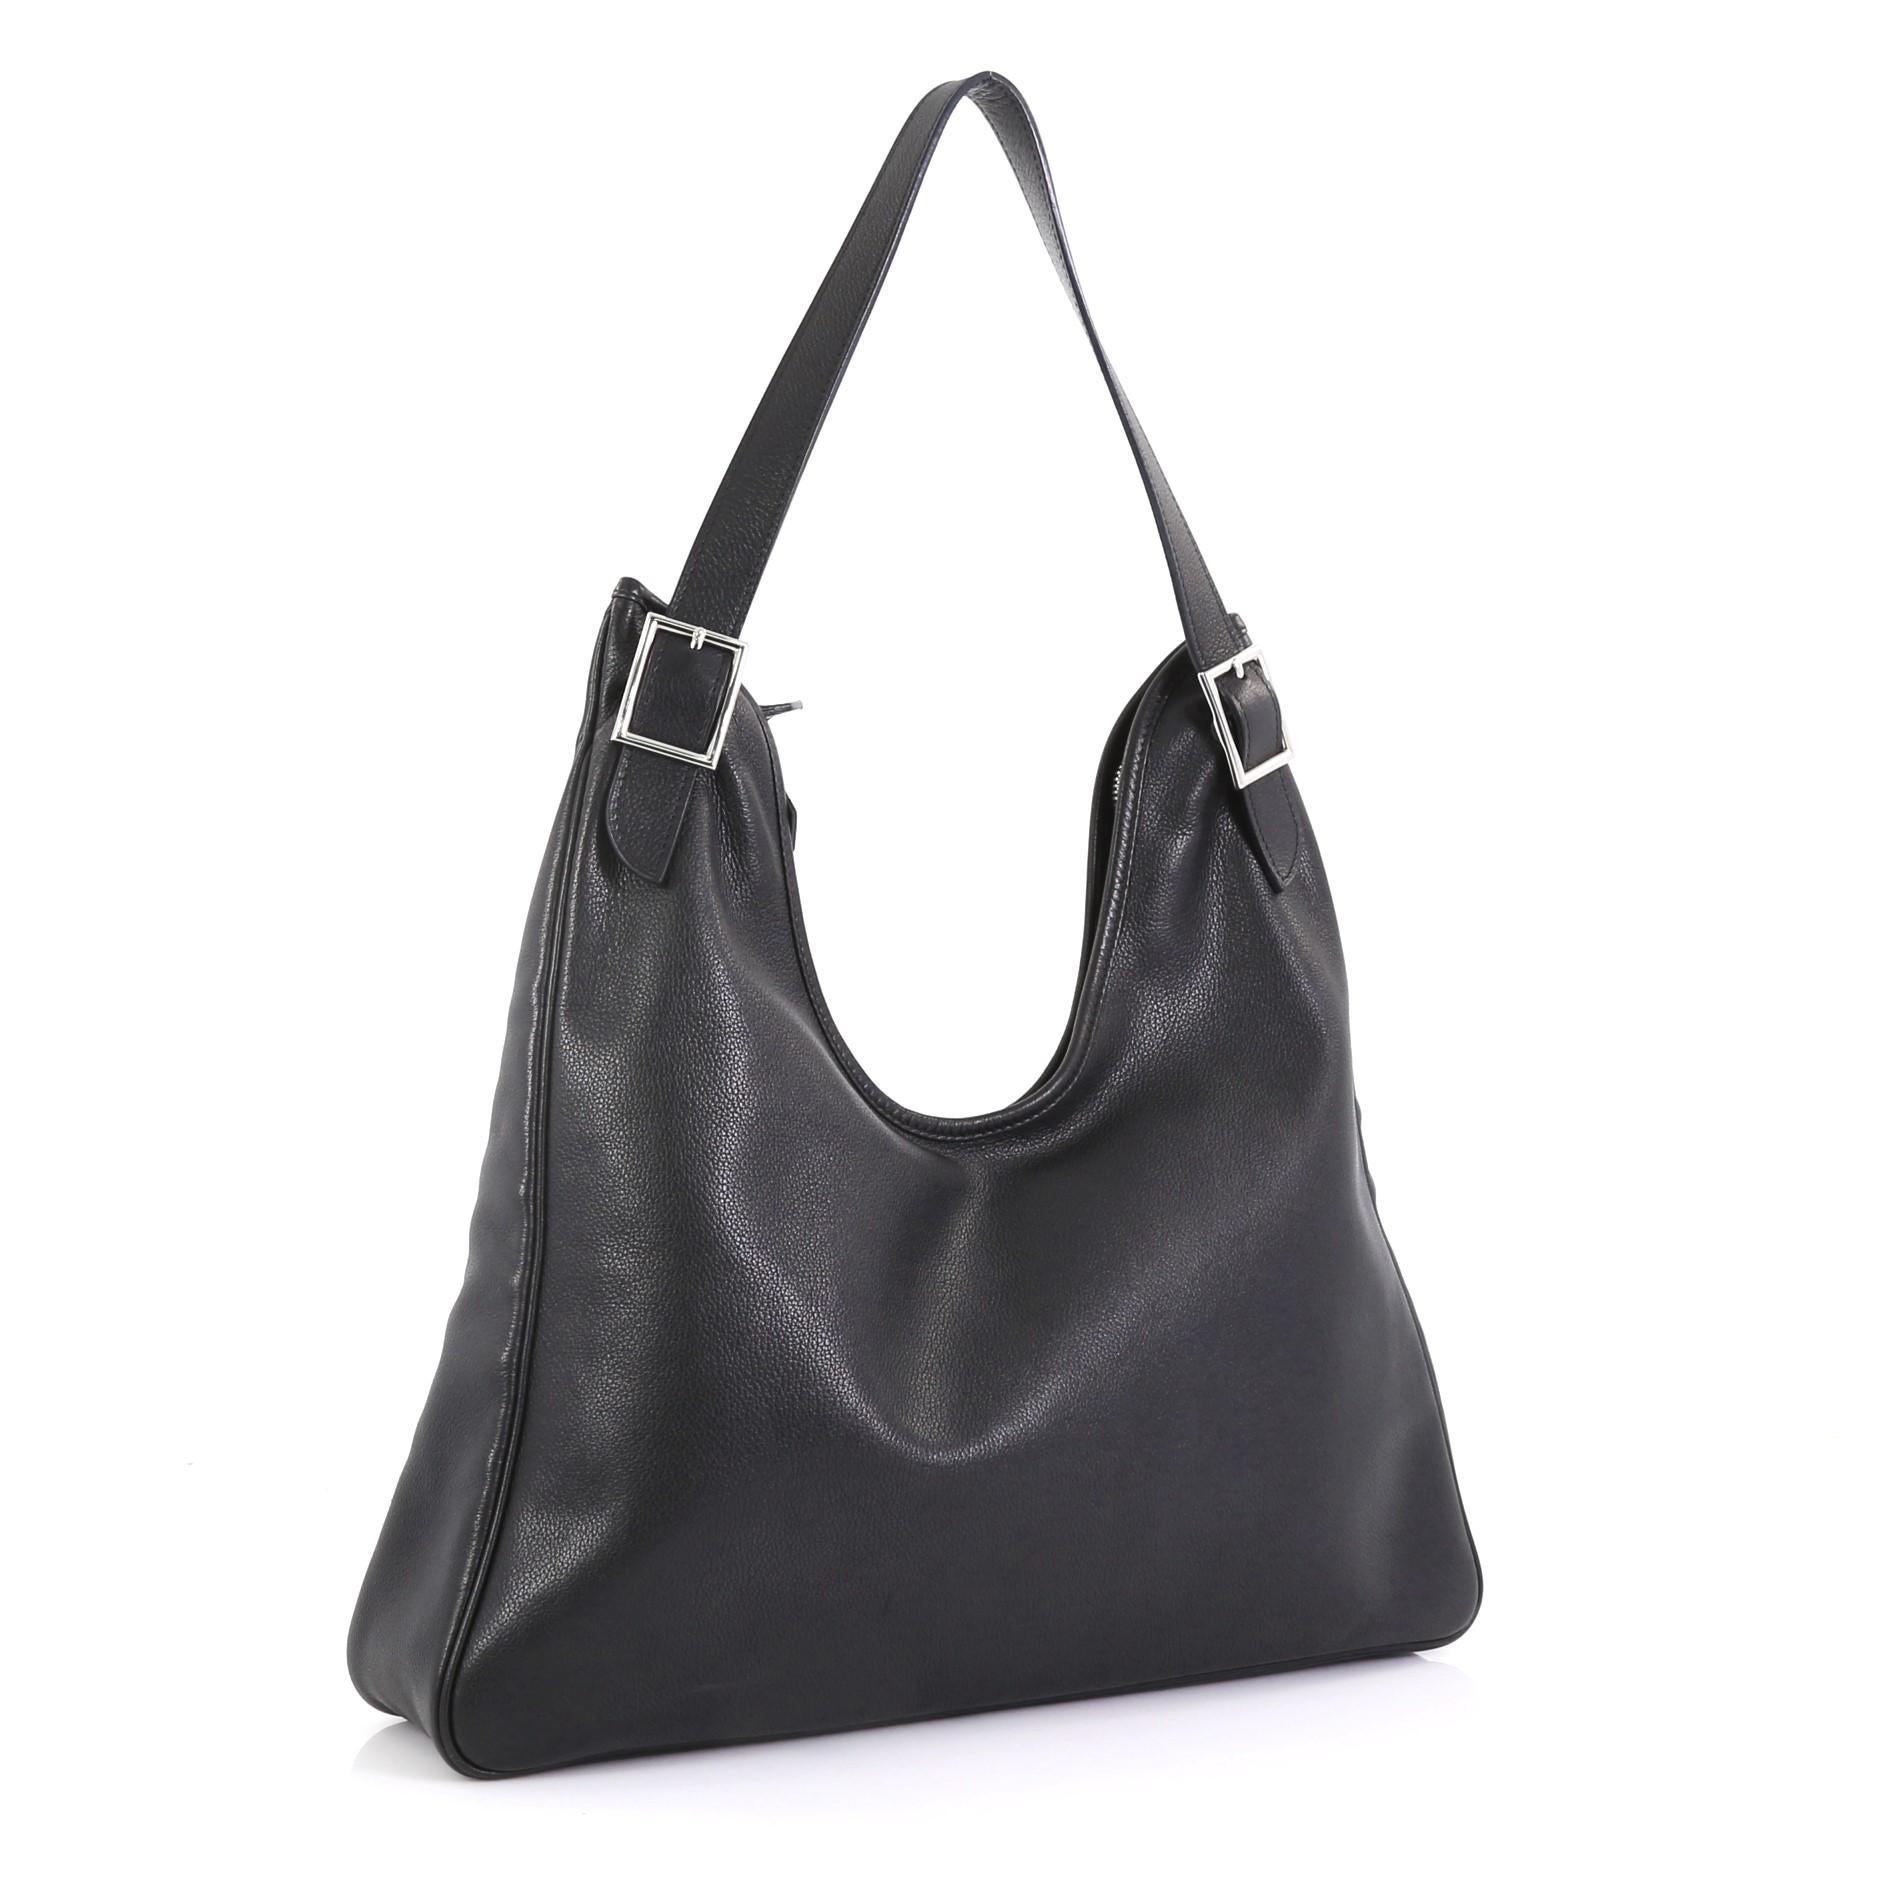 This Hermes Massai Cut Handbag Leather 32, crafted from Noir black Evergrain leather, features a single looped shoulder strap with buckle details and palladium hardware. Its zip closure opens to an Ecru neutral Toile Chevron interior with side zip